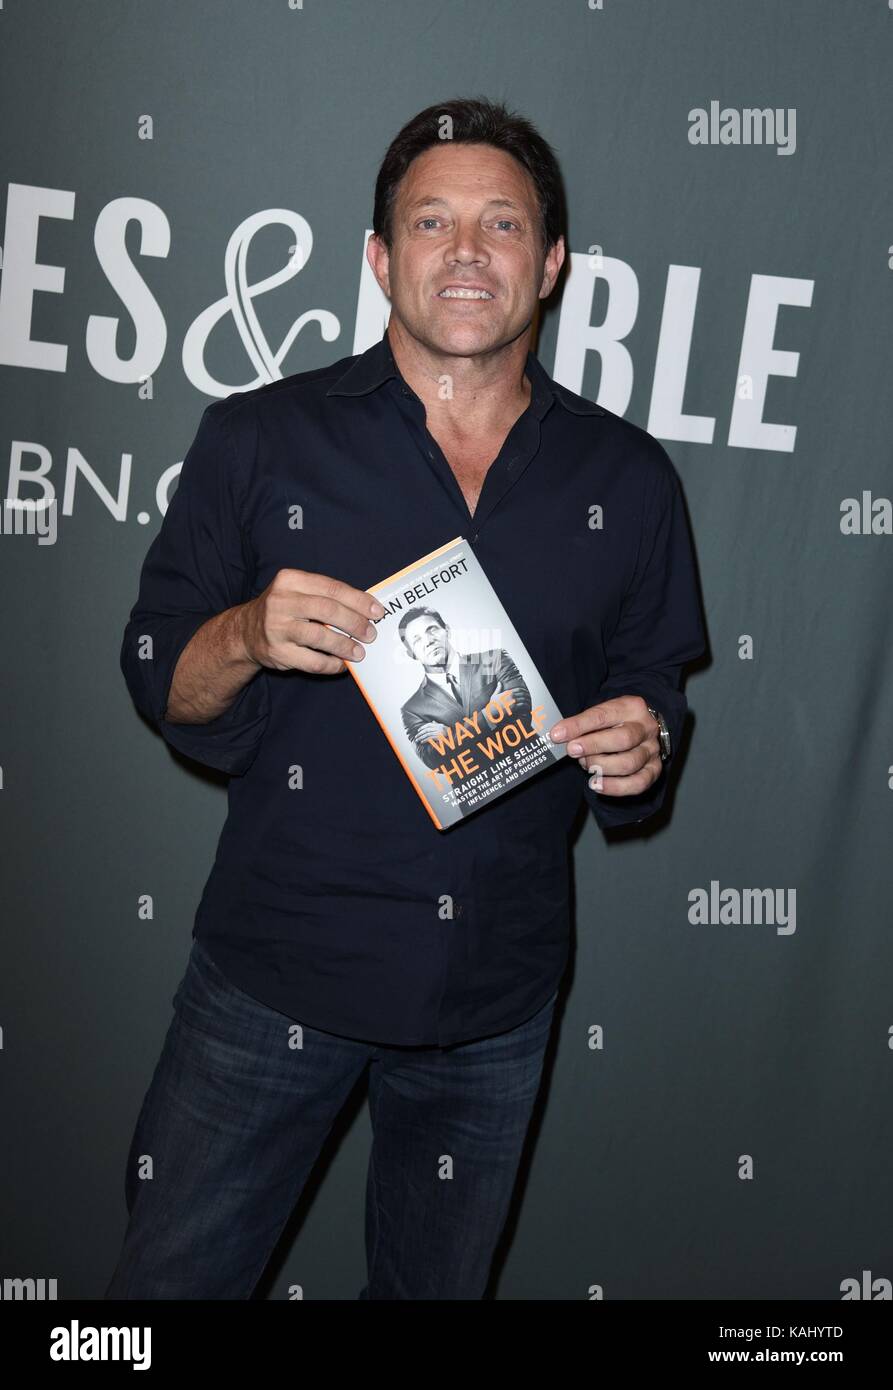 New York, NY, USA. 26th Sep, 2017. Jordan Belfort at in-store appearance  for Jordan Belfort Book Signing for WAY OF THE WOLF, Barnes and Noble Book  Store, New York, NY September 26,